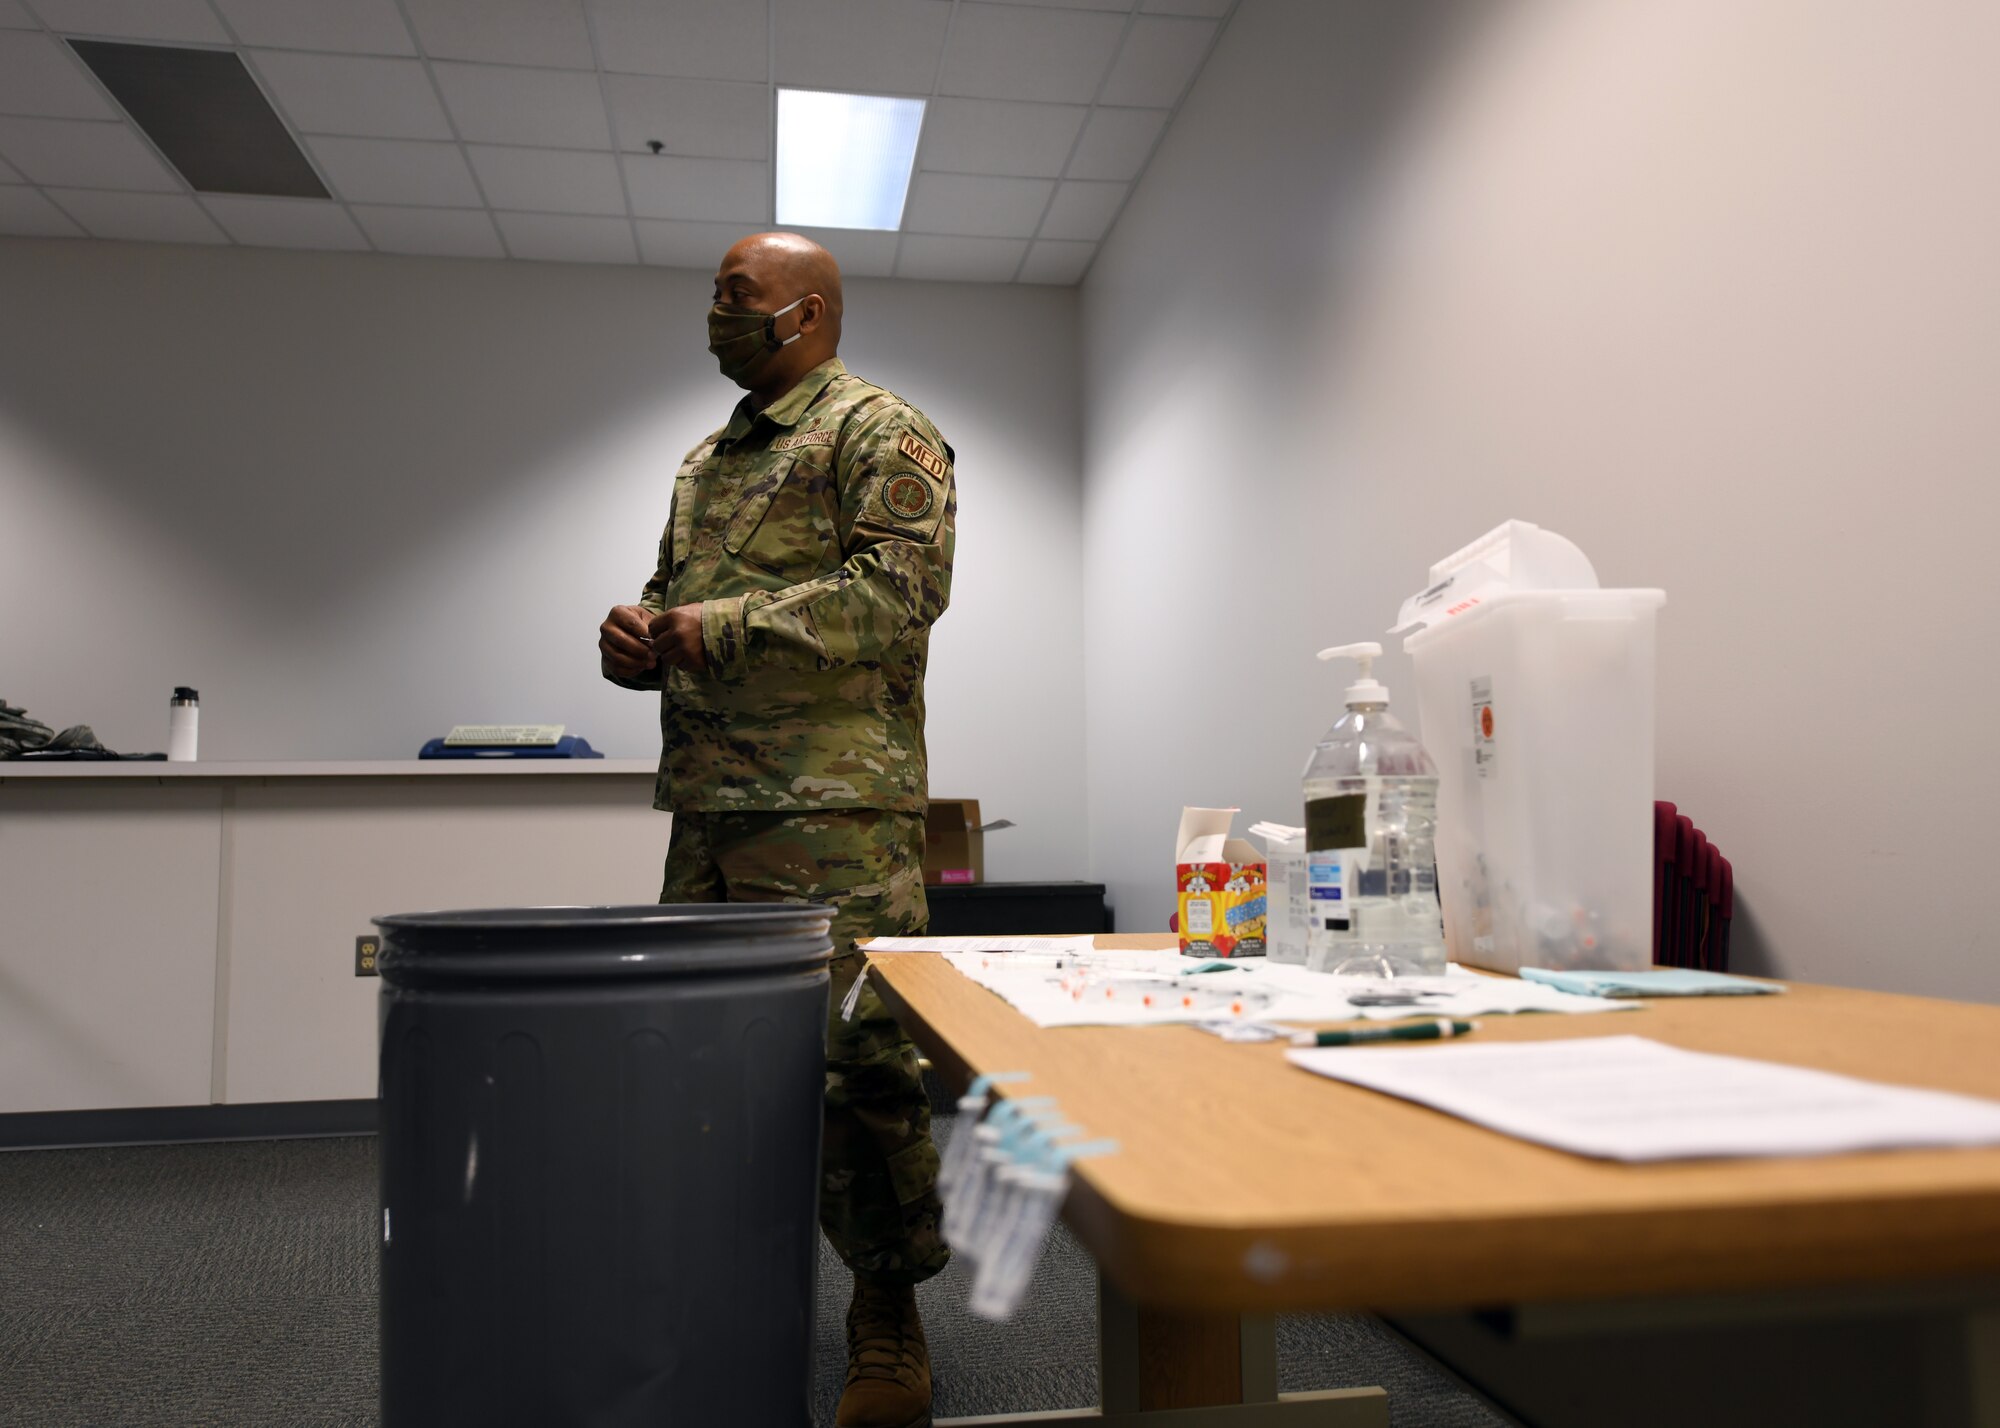 A US Air Force Master Sgt. stands next to a table with vaccine materials, including needles and vials of medication.